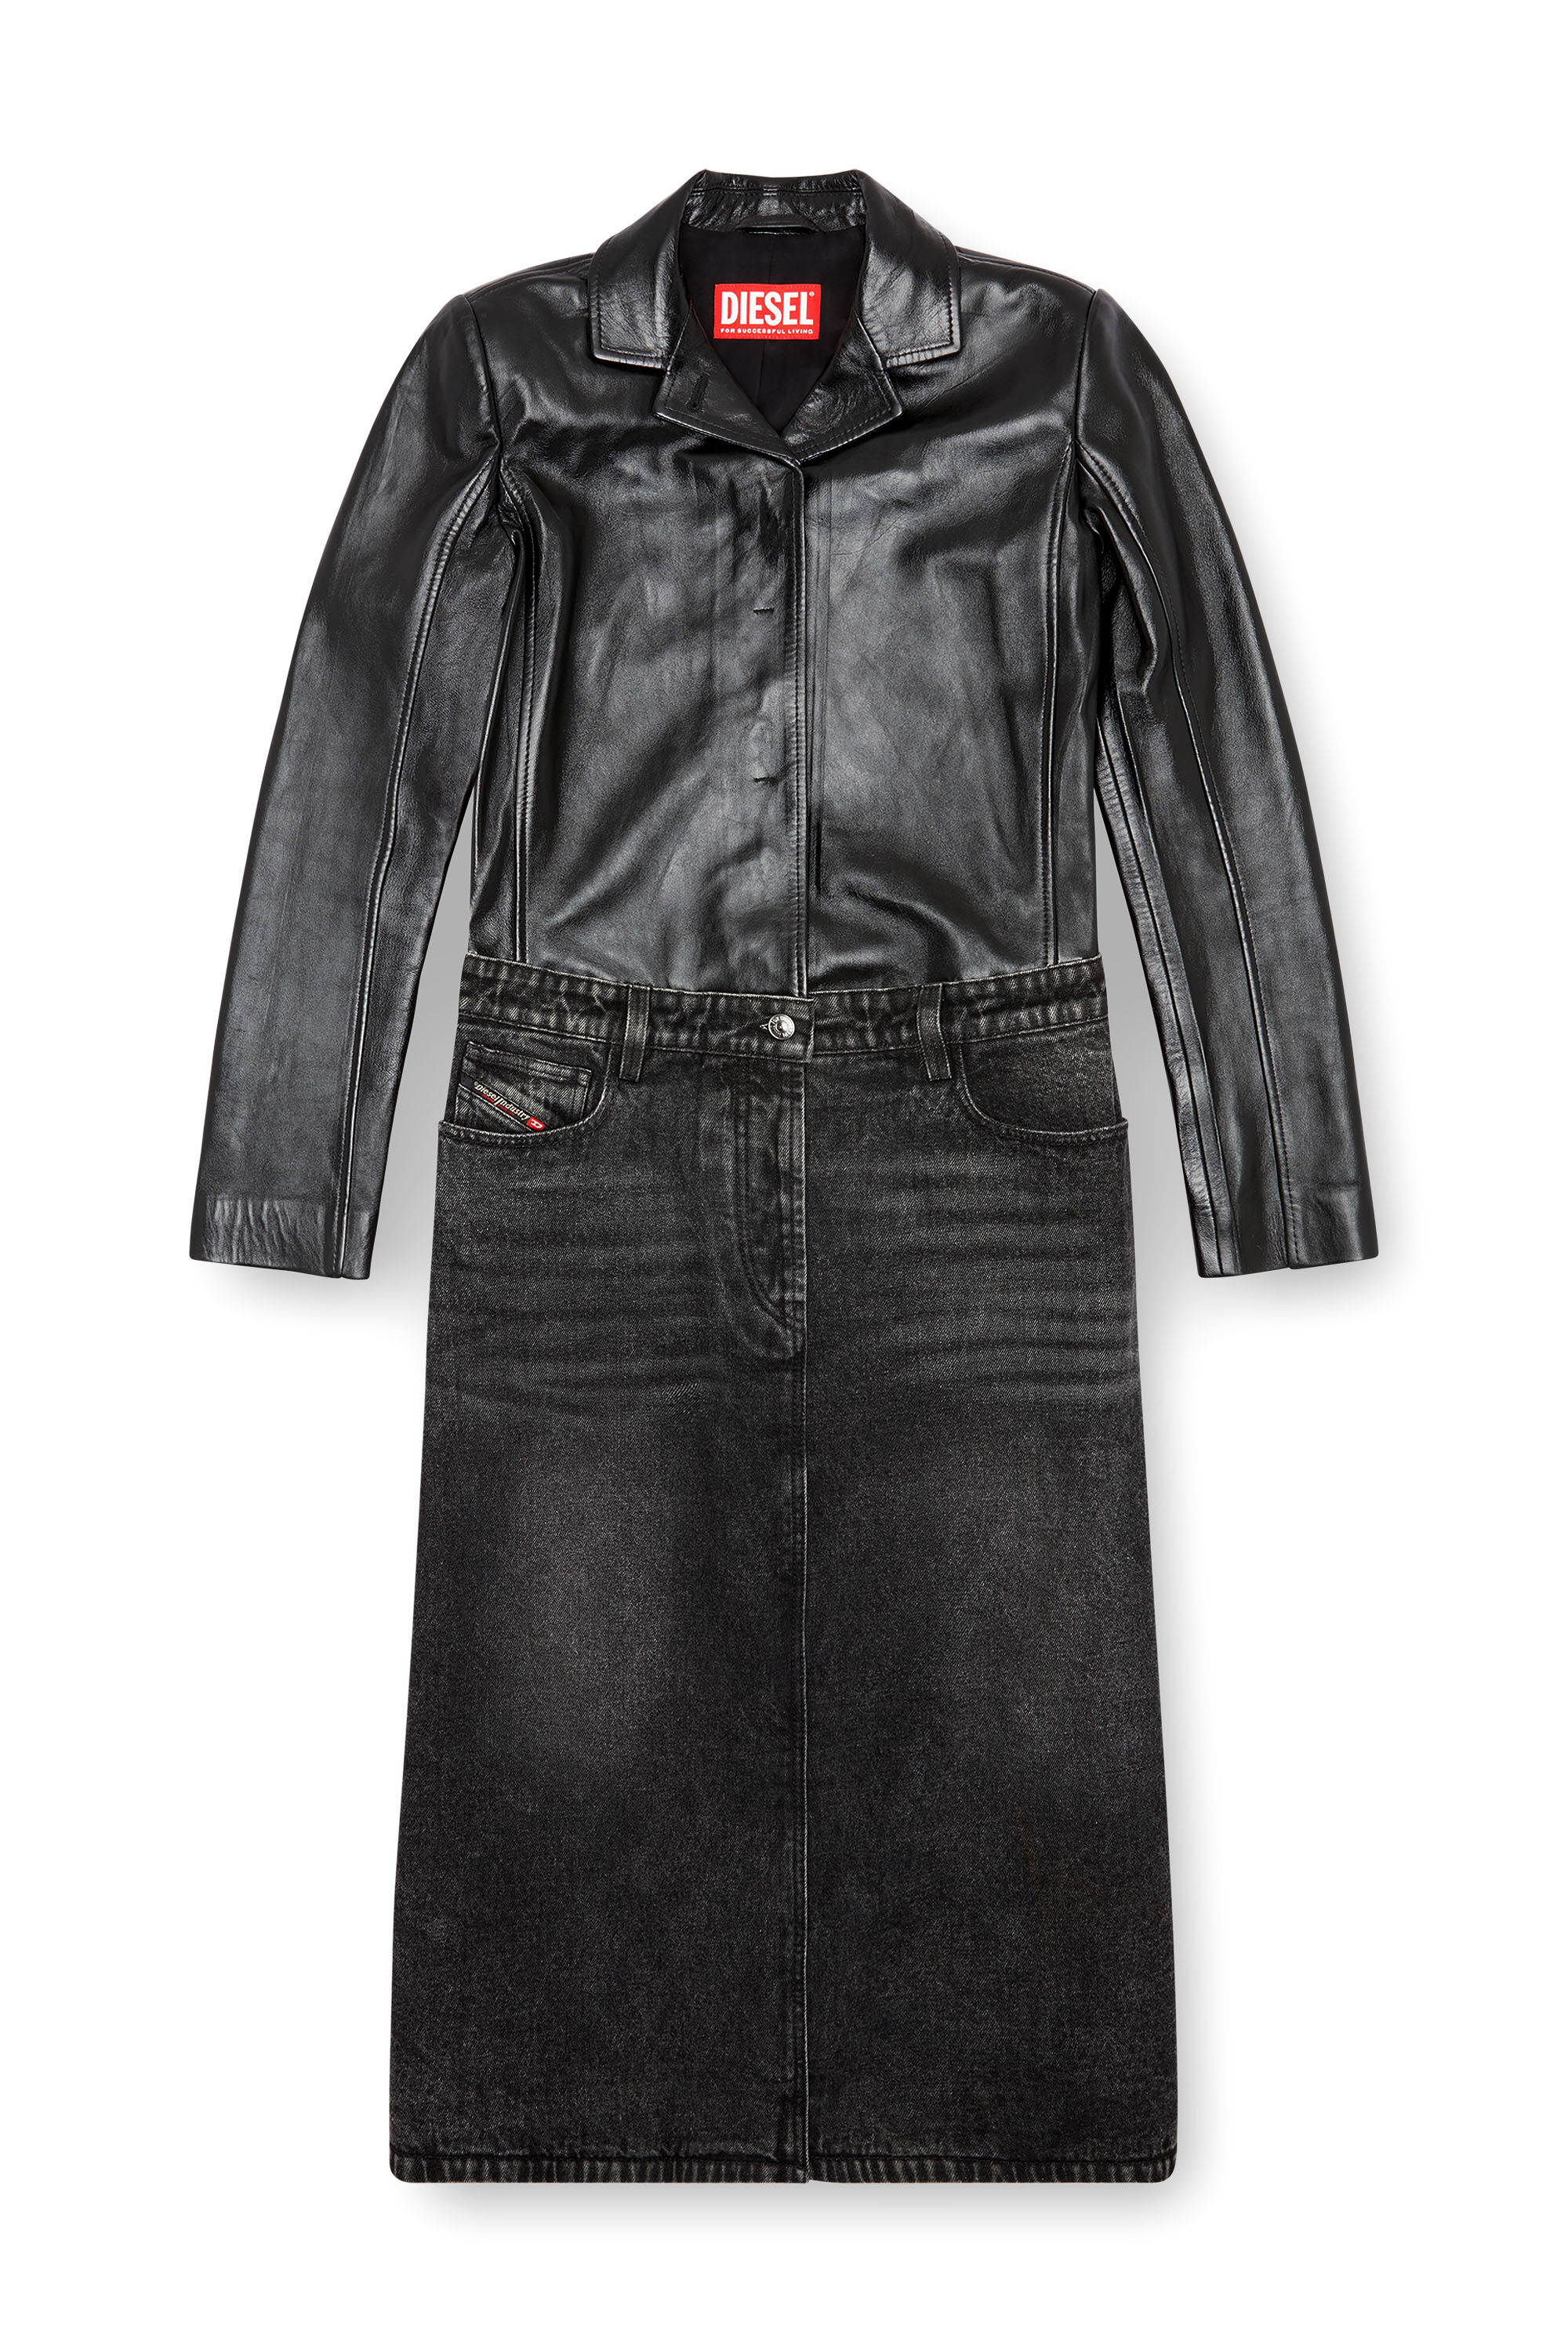 Diesel - L-ORY, Female Hybrid coat in denim and leather in ブラック - Image 2